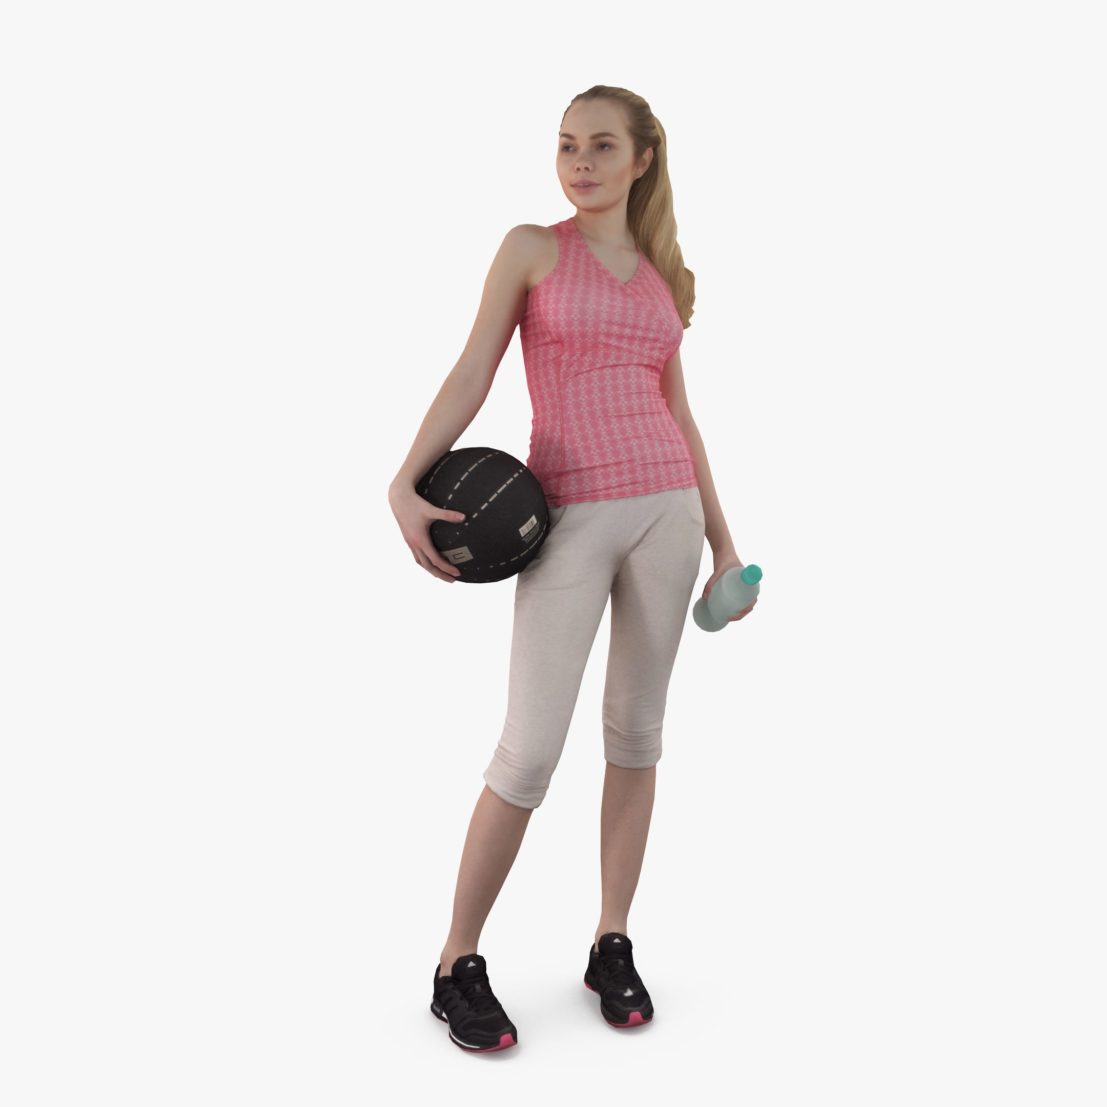 Sport Woman with Ball 3D Model FREE Download | 3DTree Studio